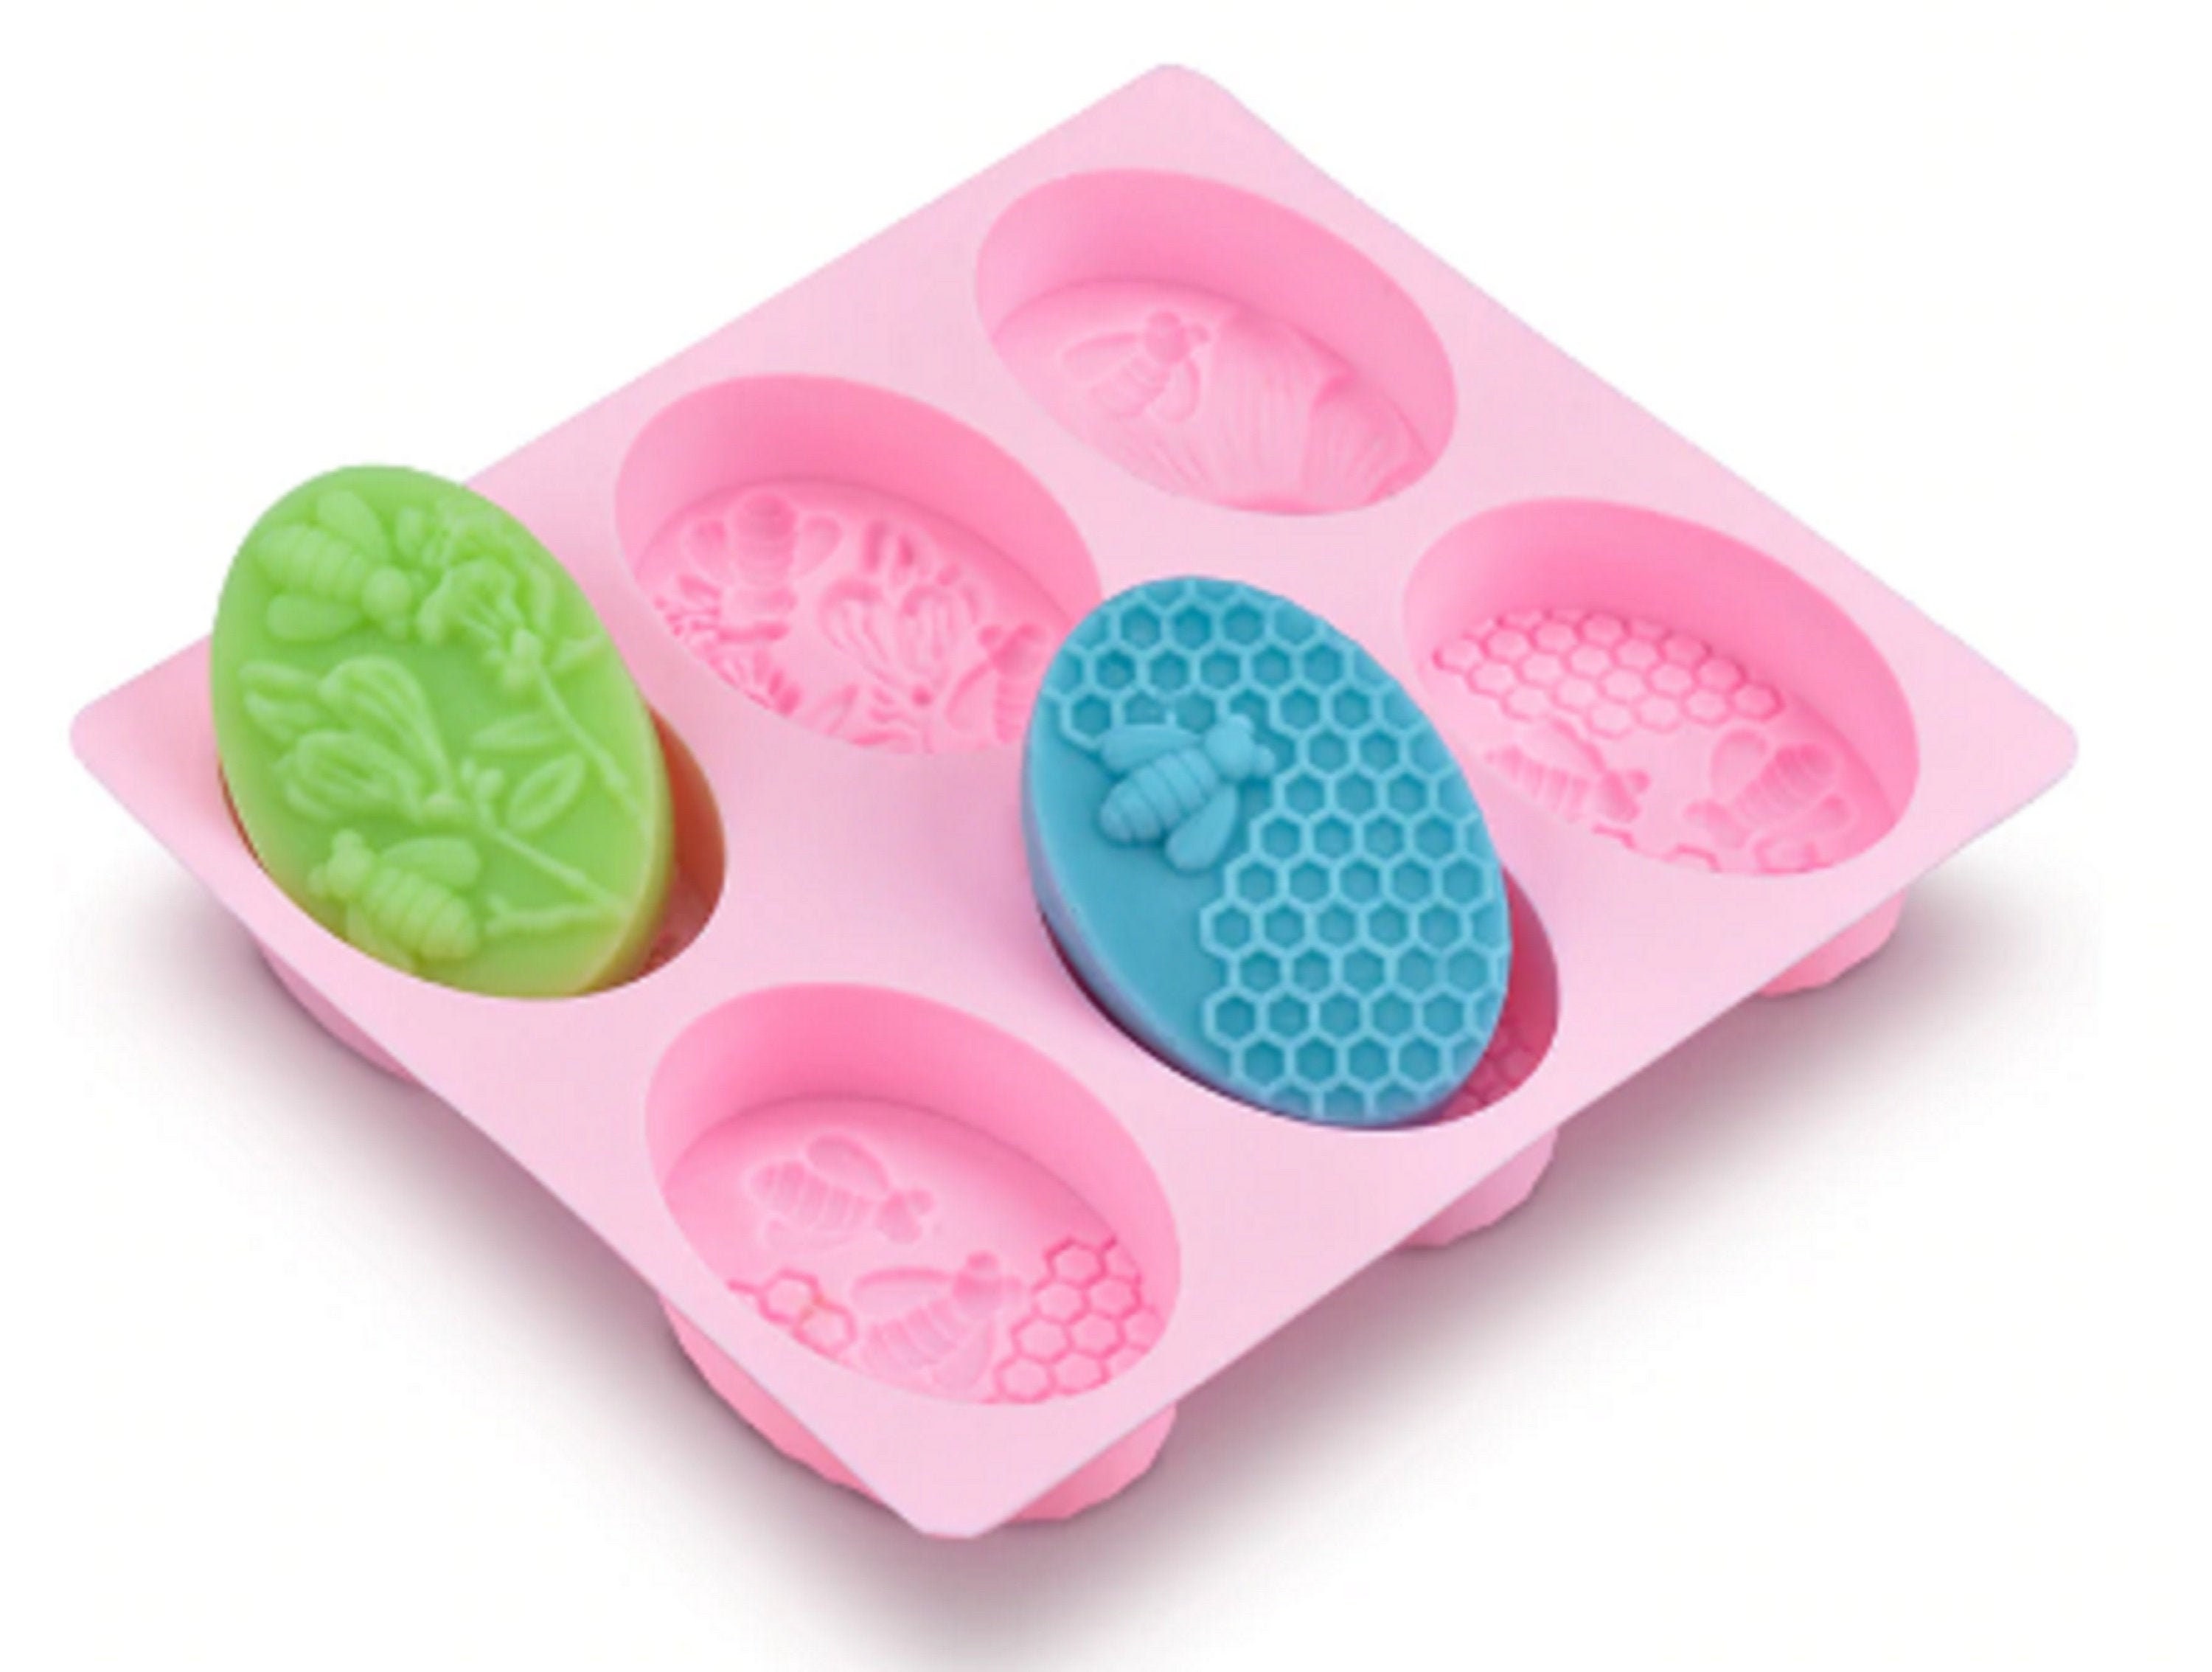 Silicone Honeycomb Soap Mold by Make Market®